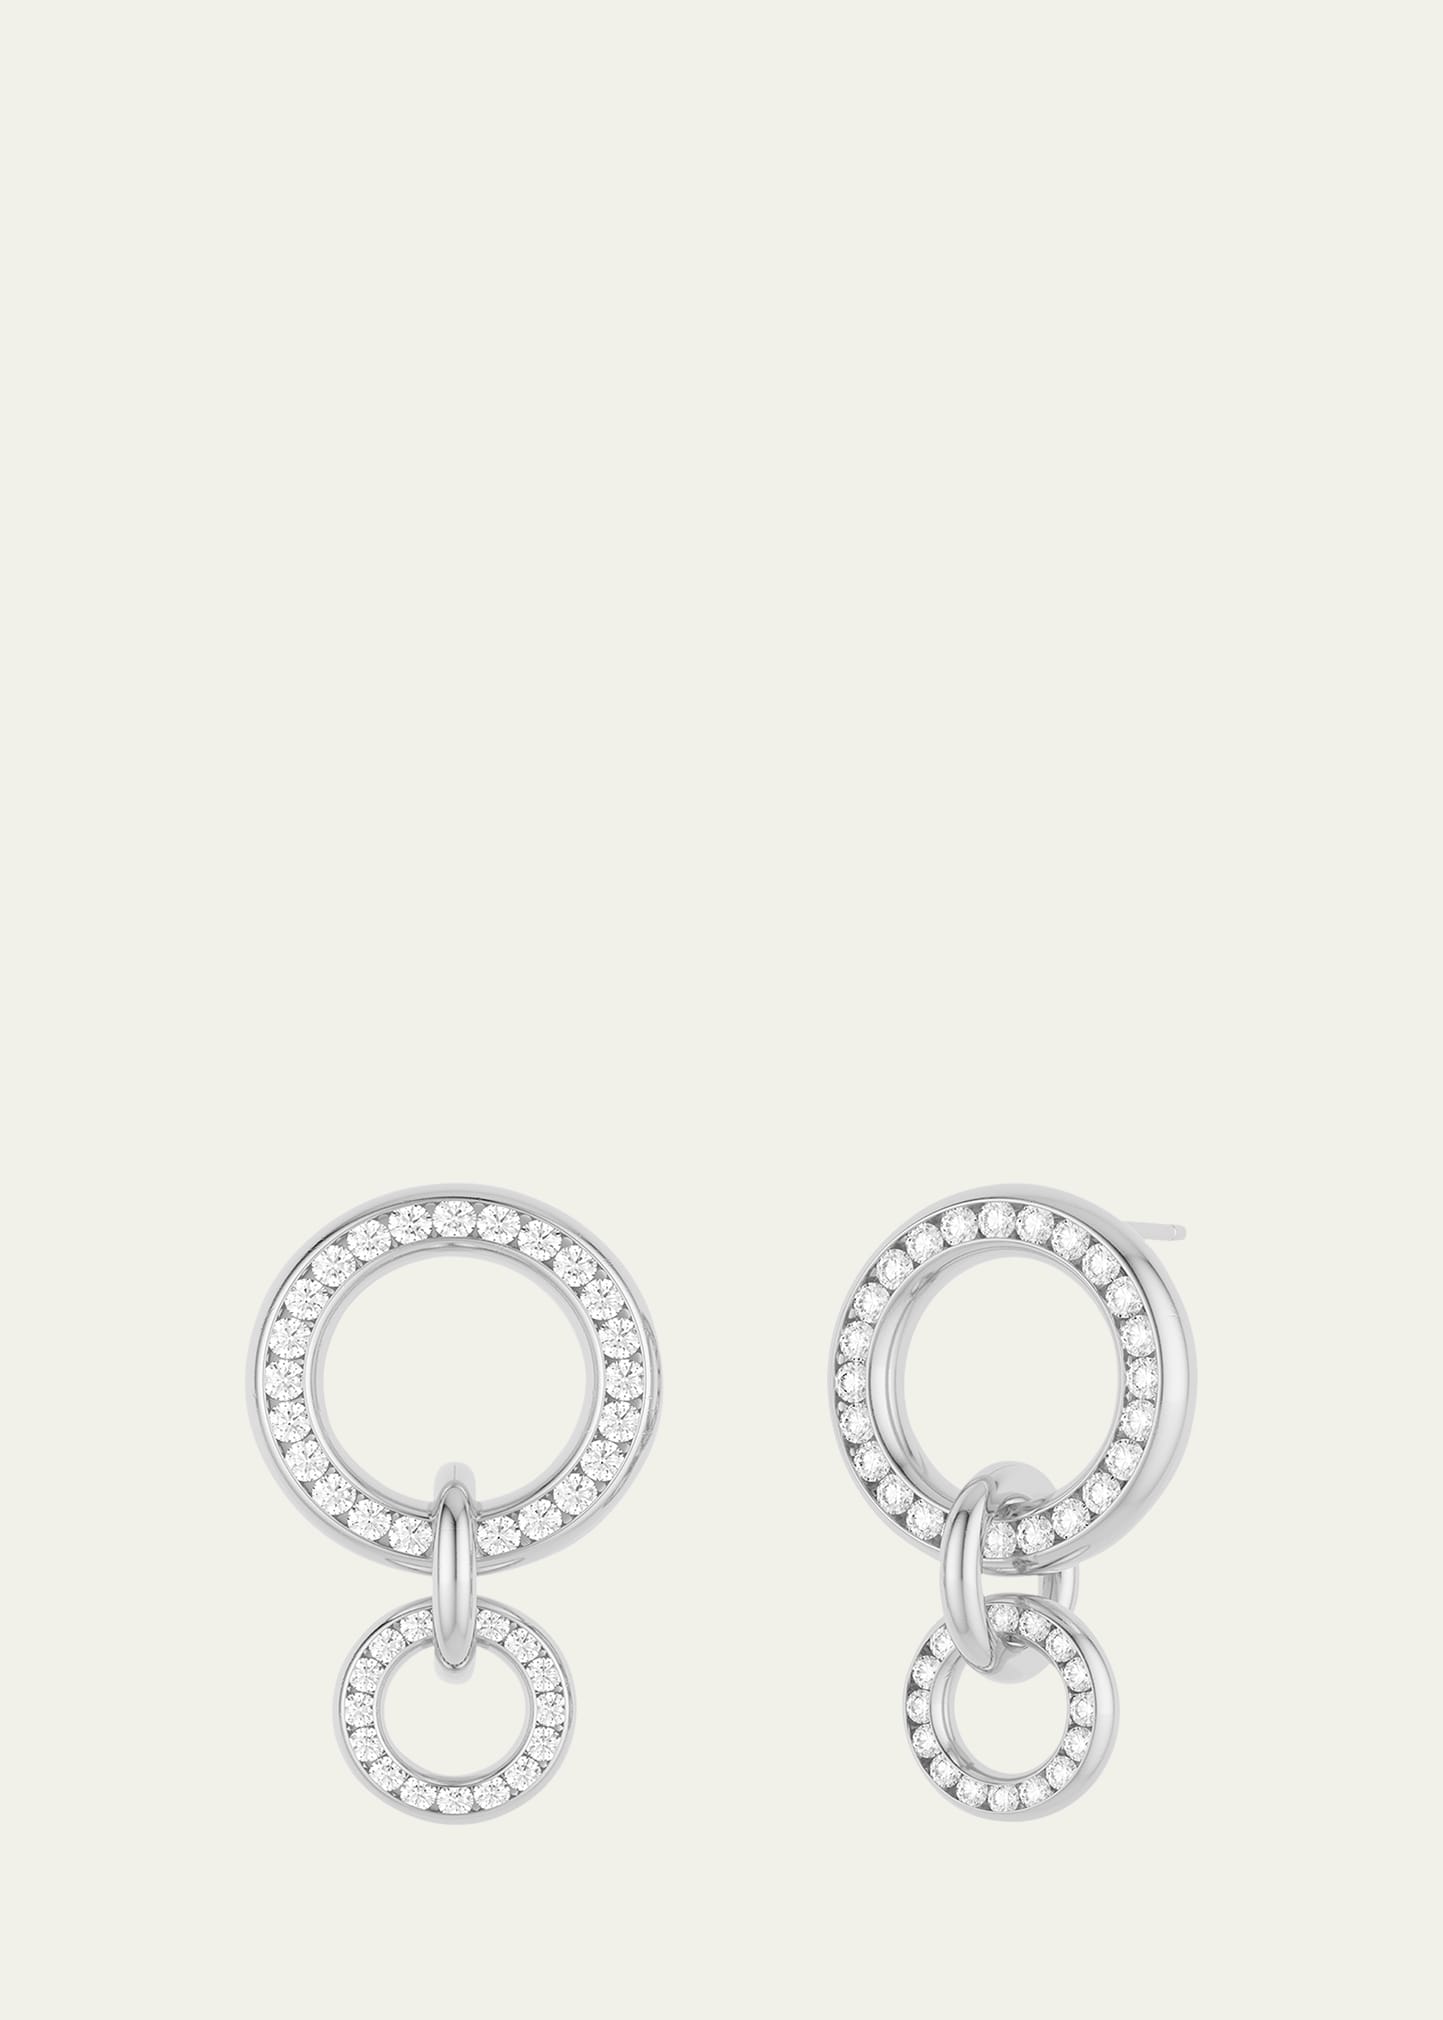 Canis 18K White Gold Double Hoop Earrings with Diamonds